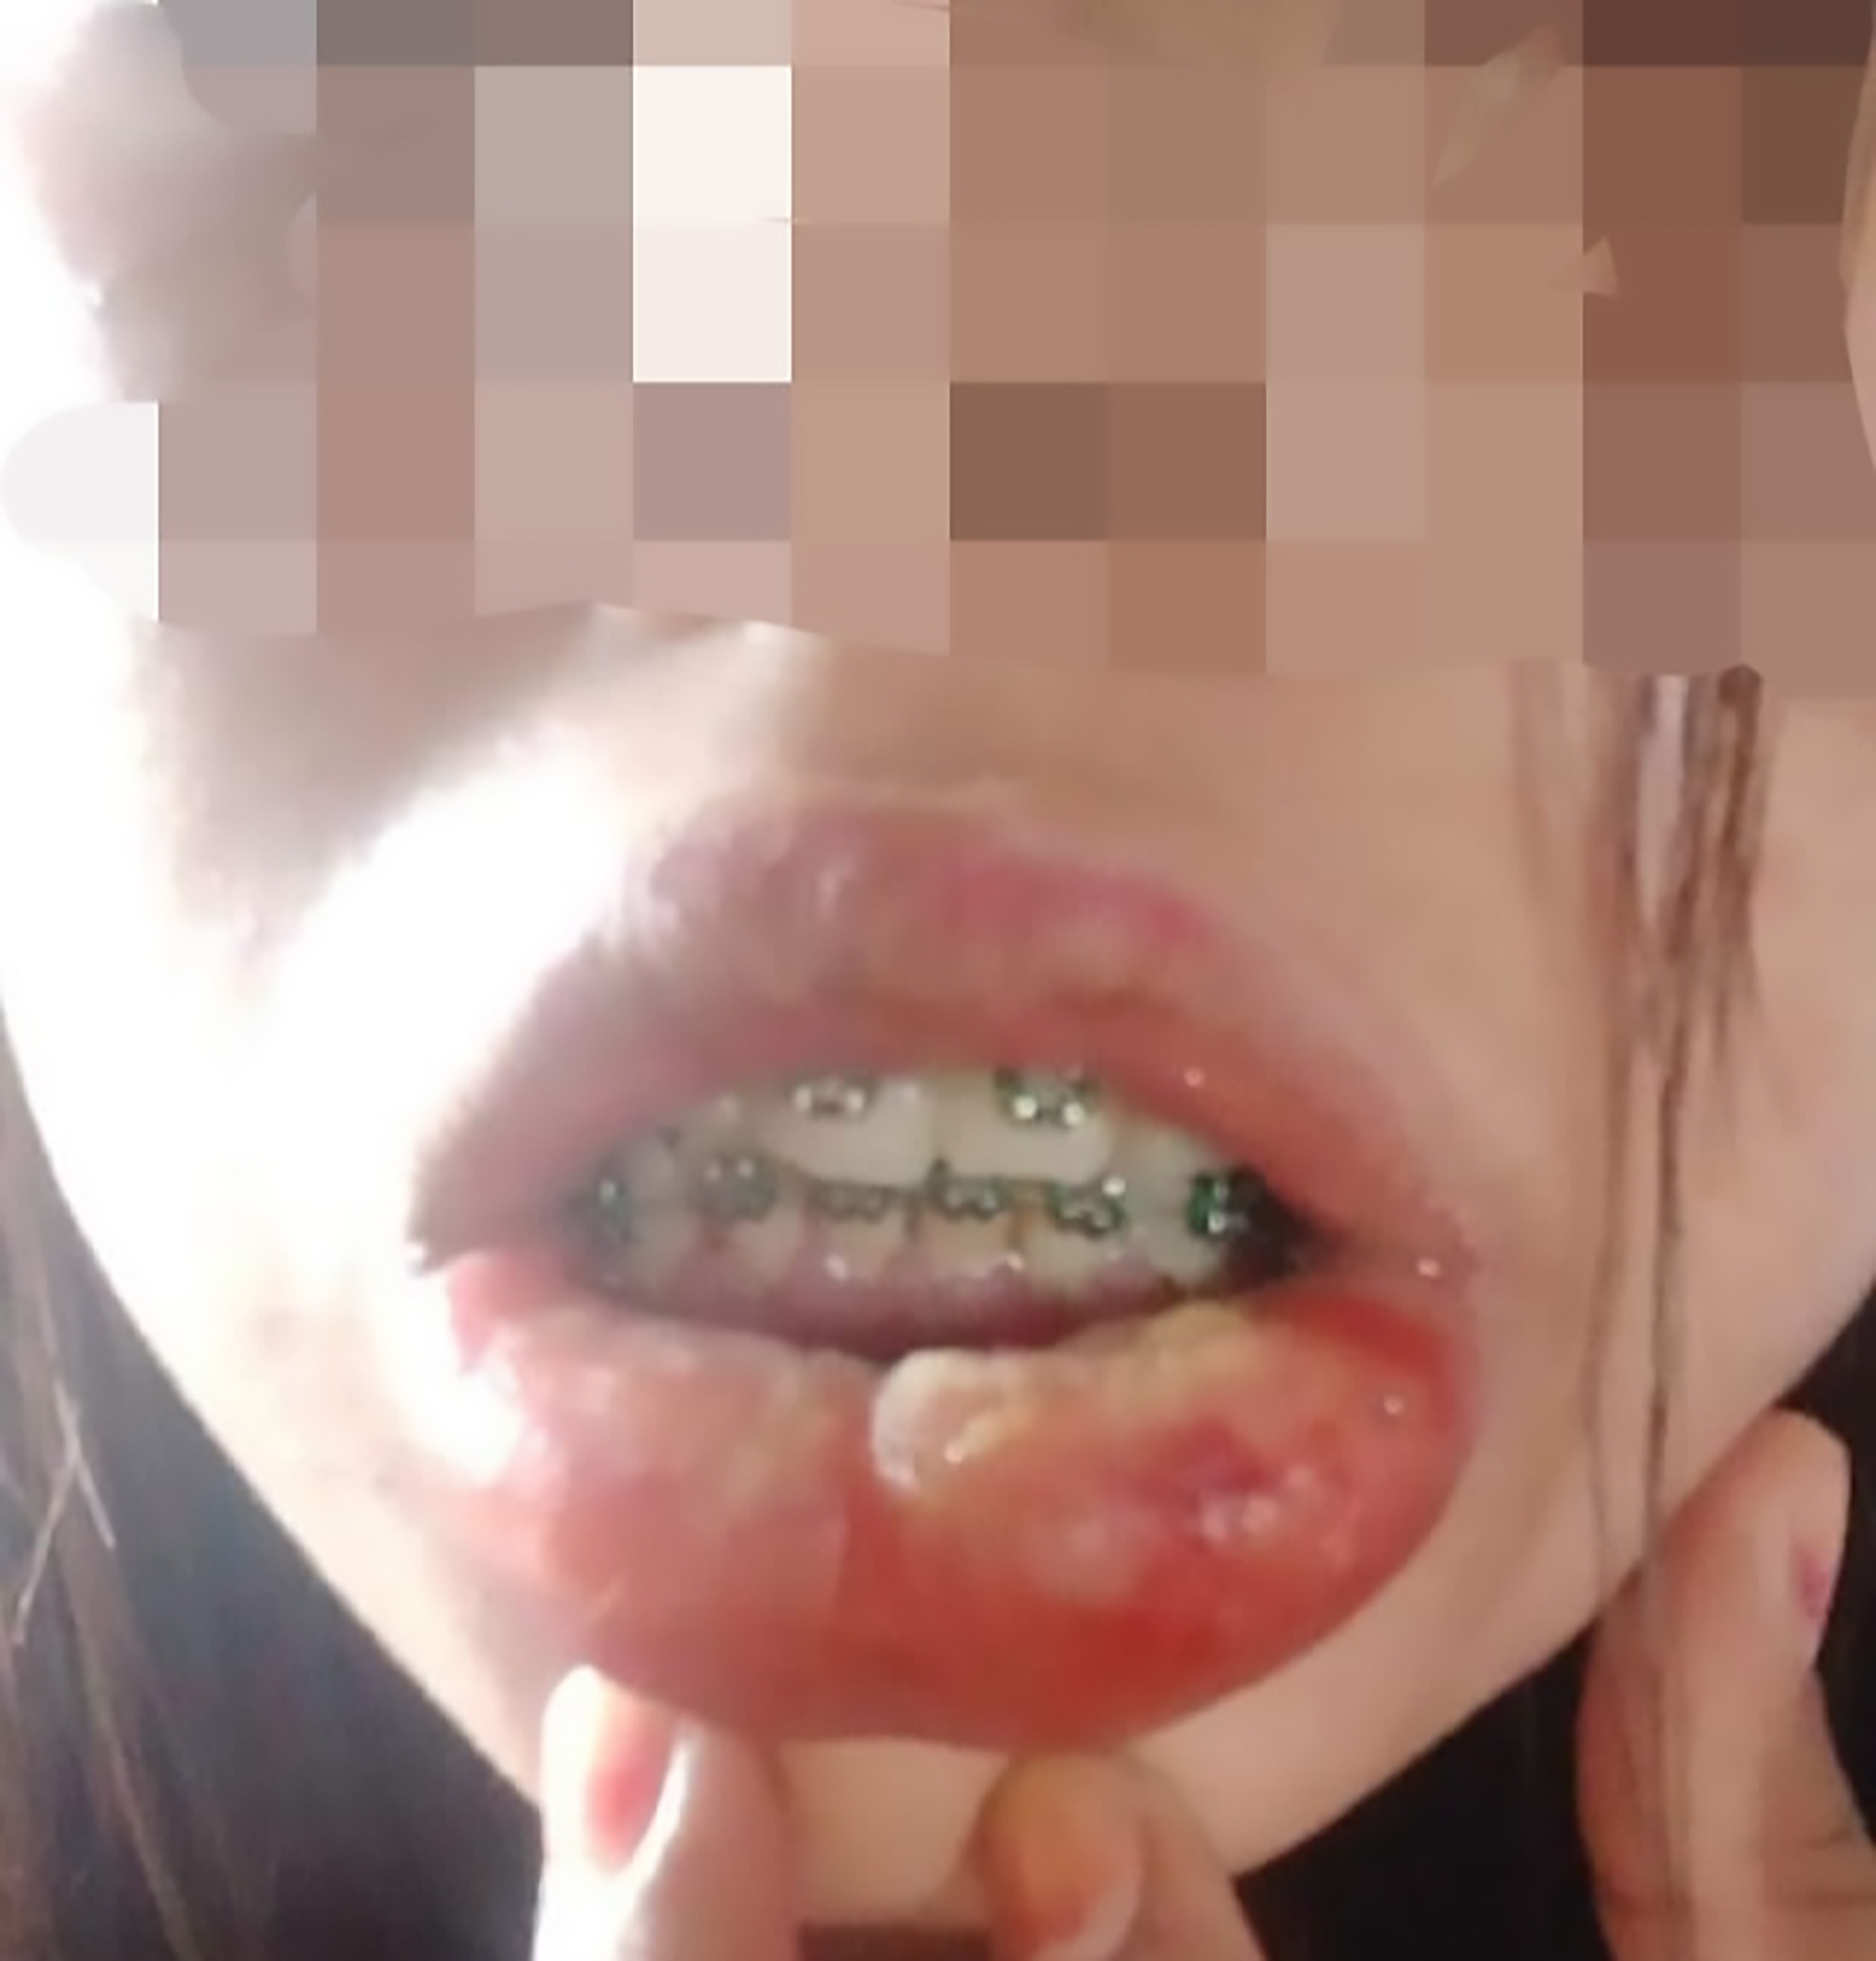 Read more about the article Bargain Braces Leave Woman With Pus-Filled Blisters